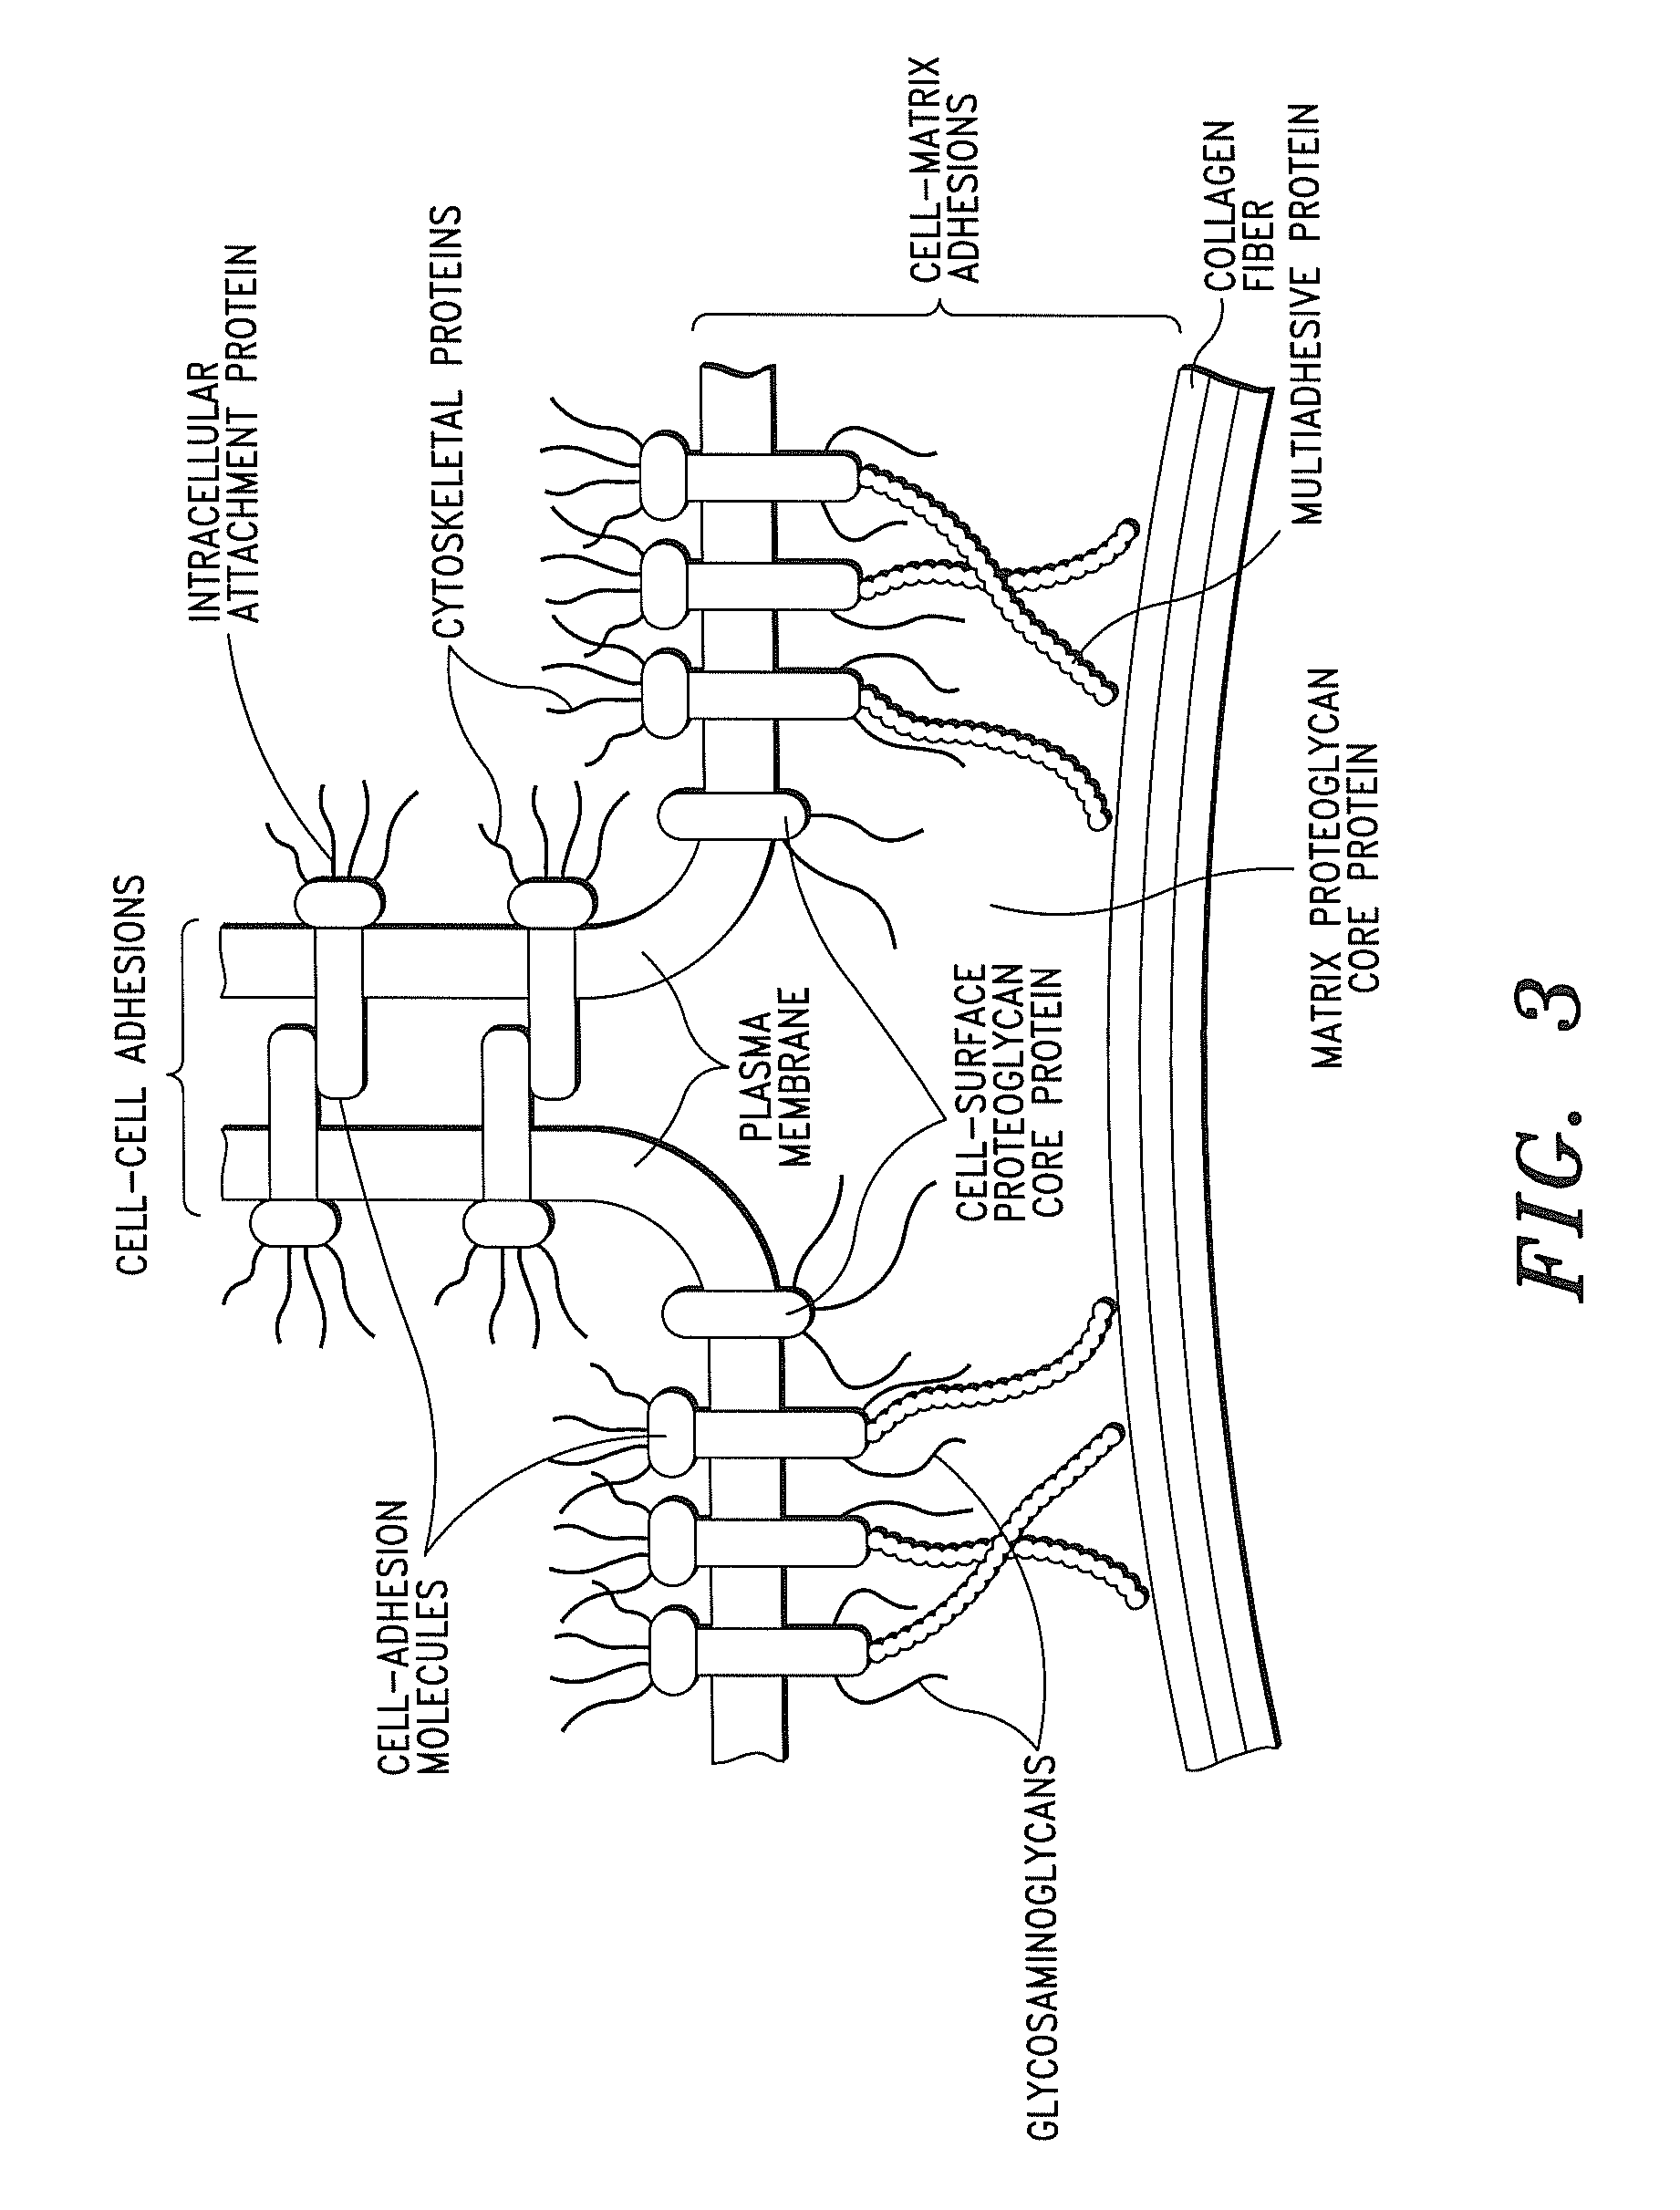 Compositions and methods for treating organ dysfunction